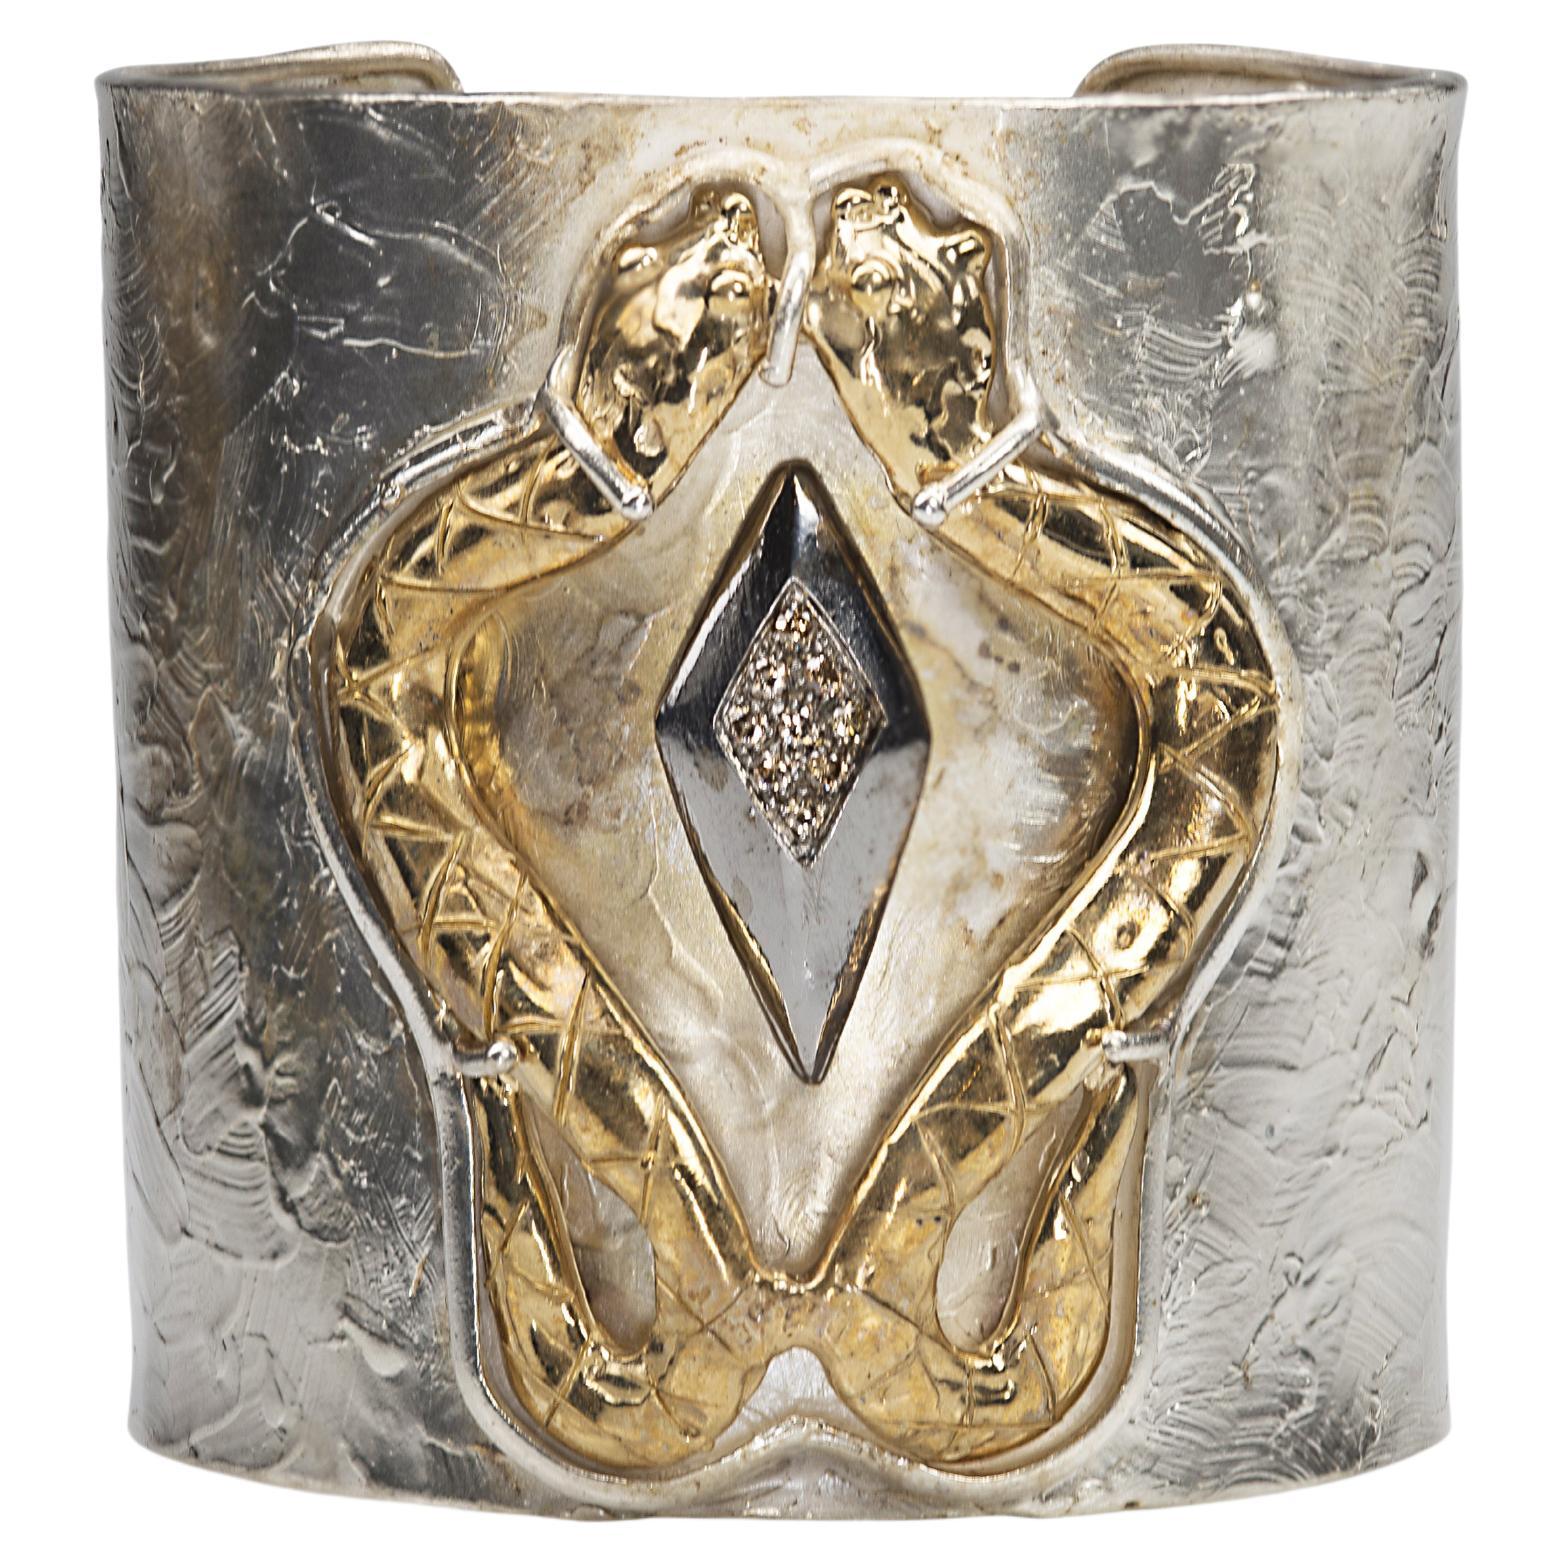 Featured on Rapaport Diamonds 24 Karat Gold-Plated Silver Sterling Cuff Bracelet